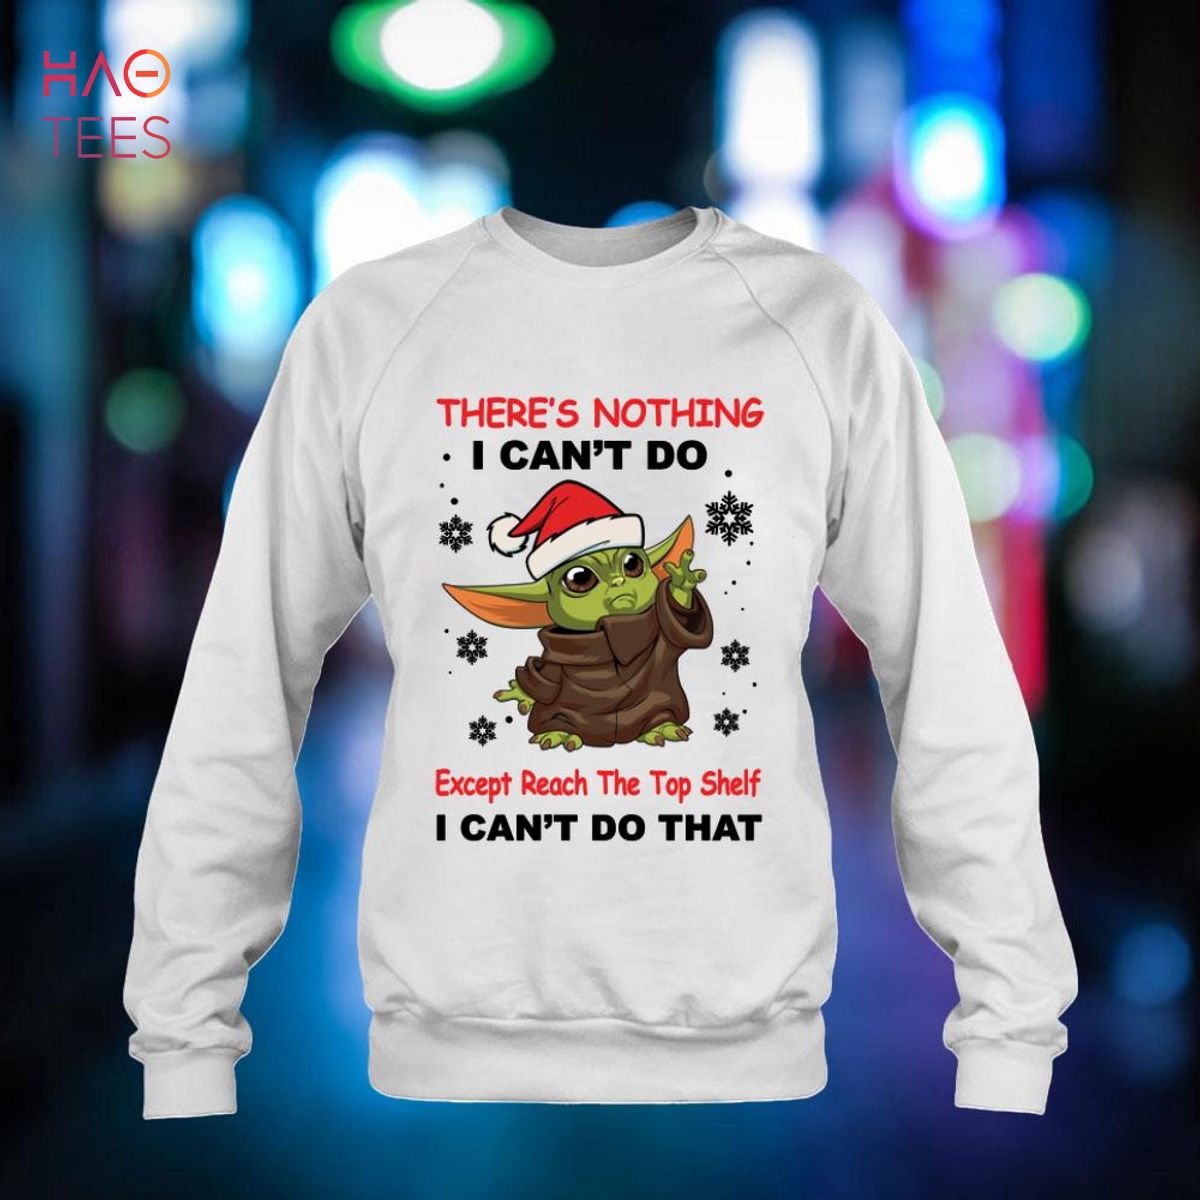 https://images.haotees.com/wp-content/uploads/2022/07/10133356/baby-yoda-theres-nothing-i-cant-do-funny-shirt-3-BKKMc.jpg